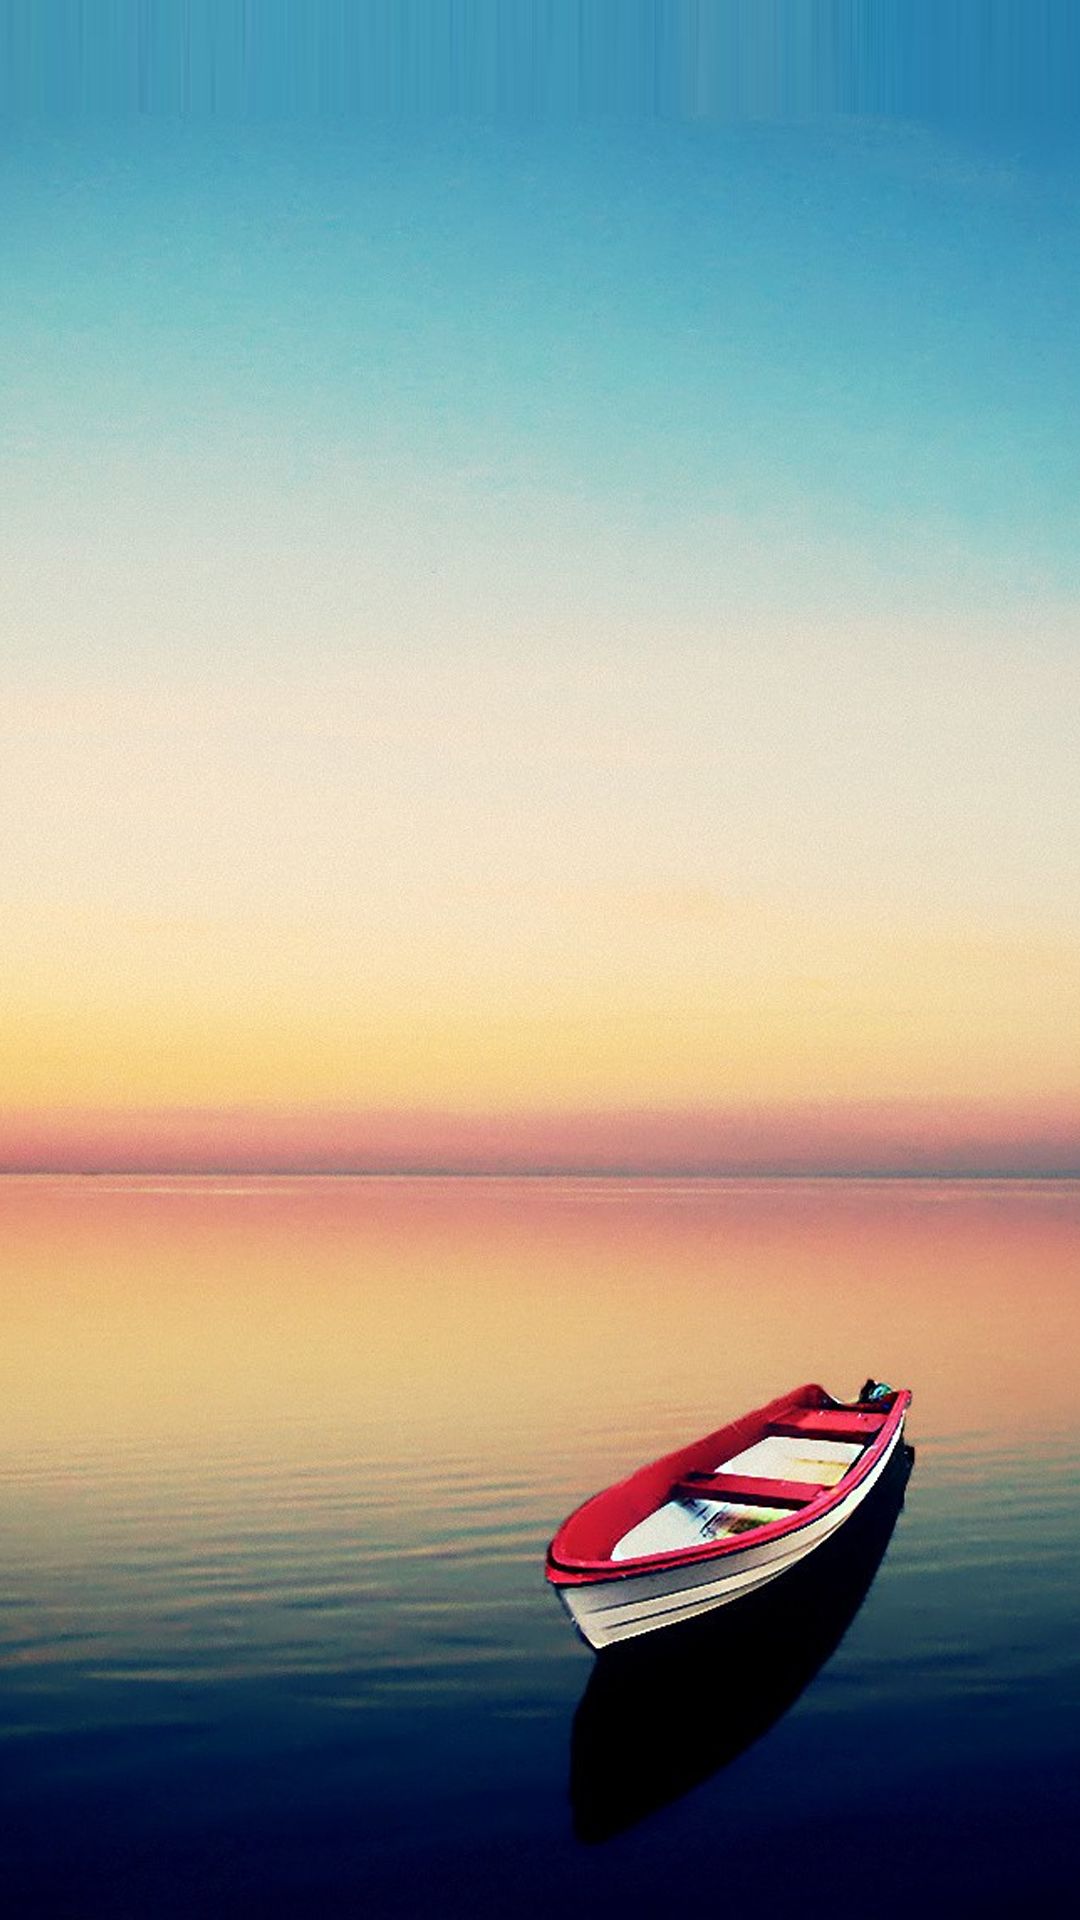 Boat at Sunset Smartphone HD Wallpapers ⋆ GetPhotos